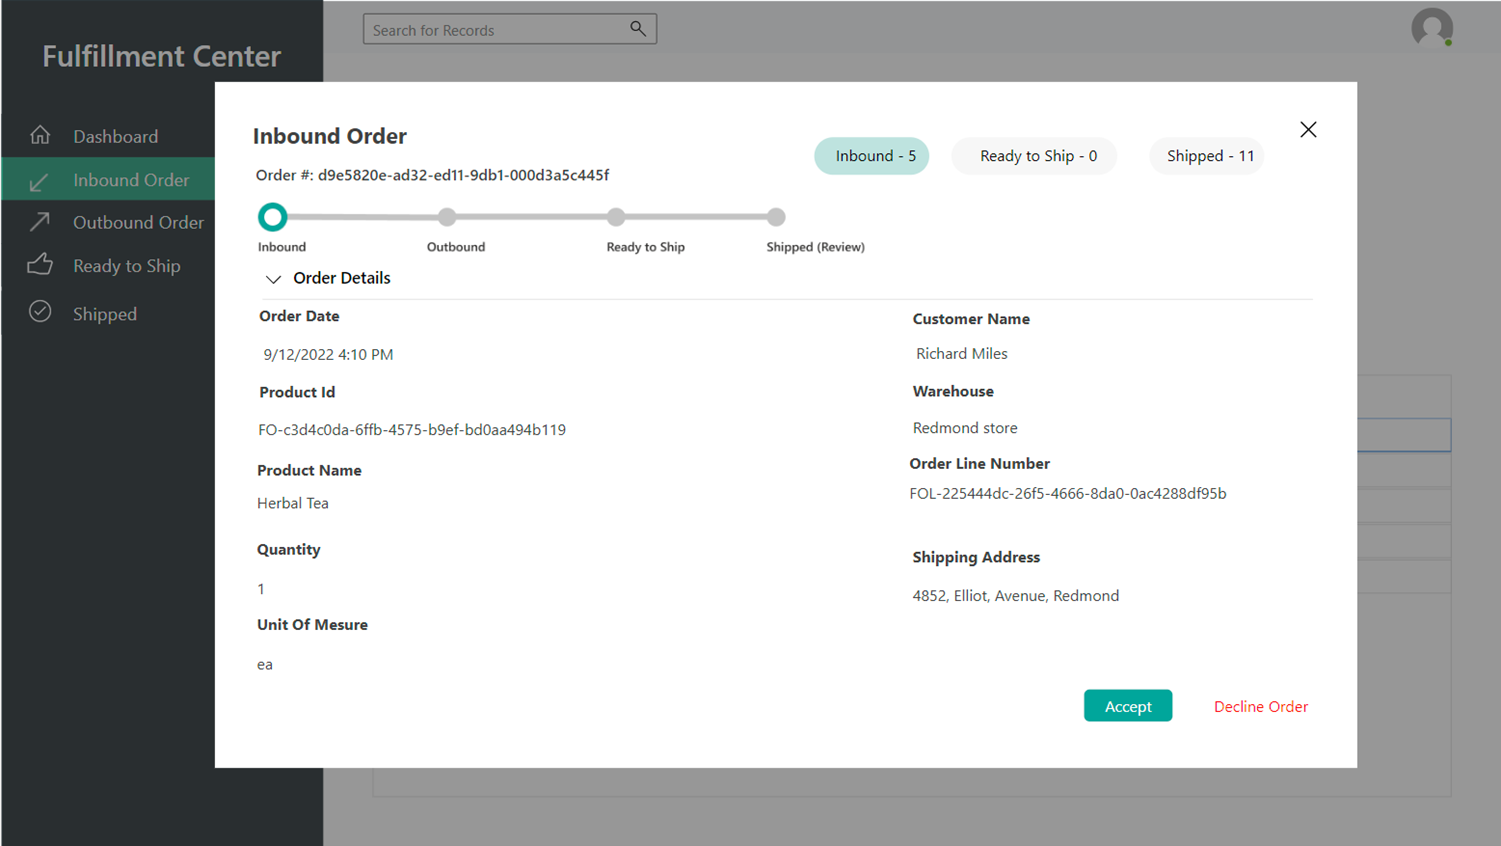 Inbound Order page in the demo fulfillment app.